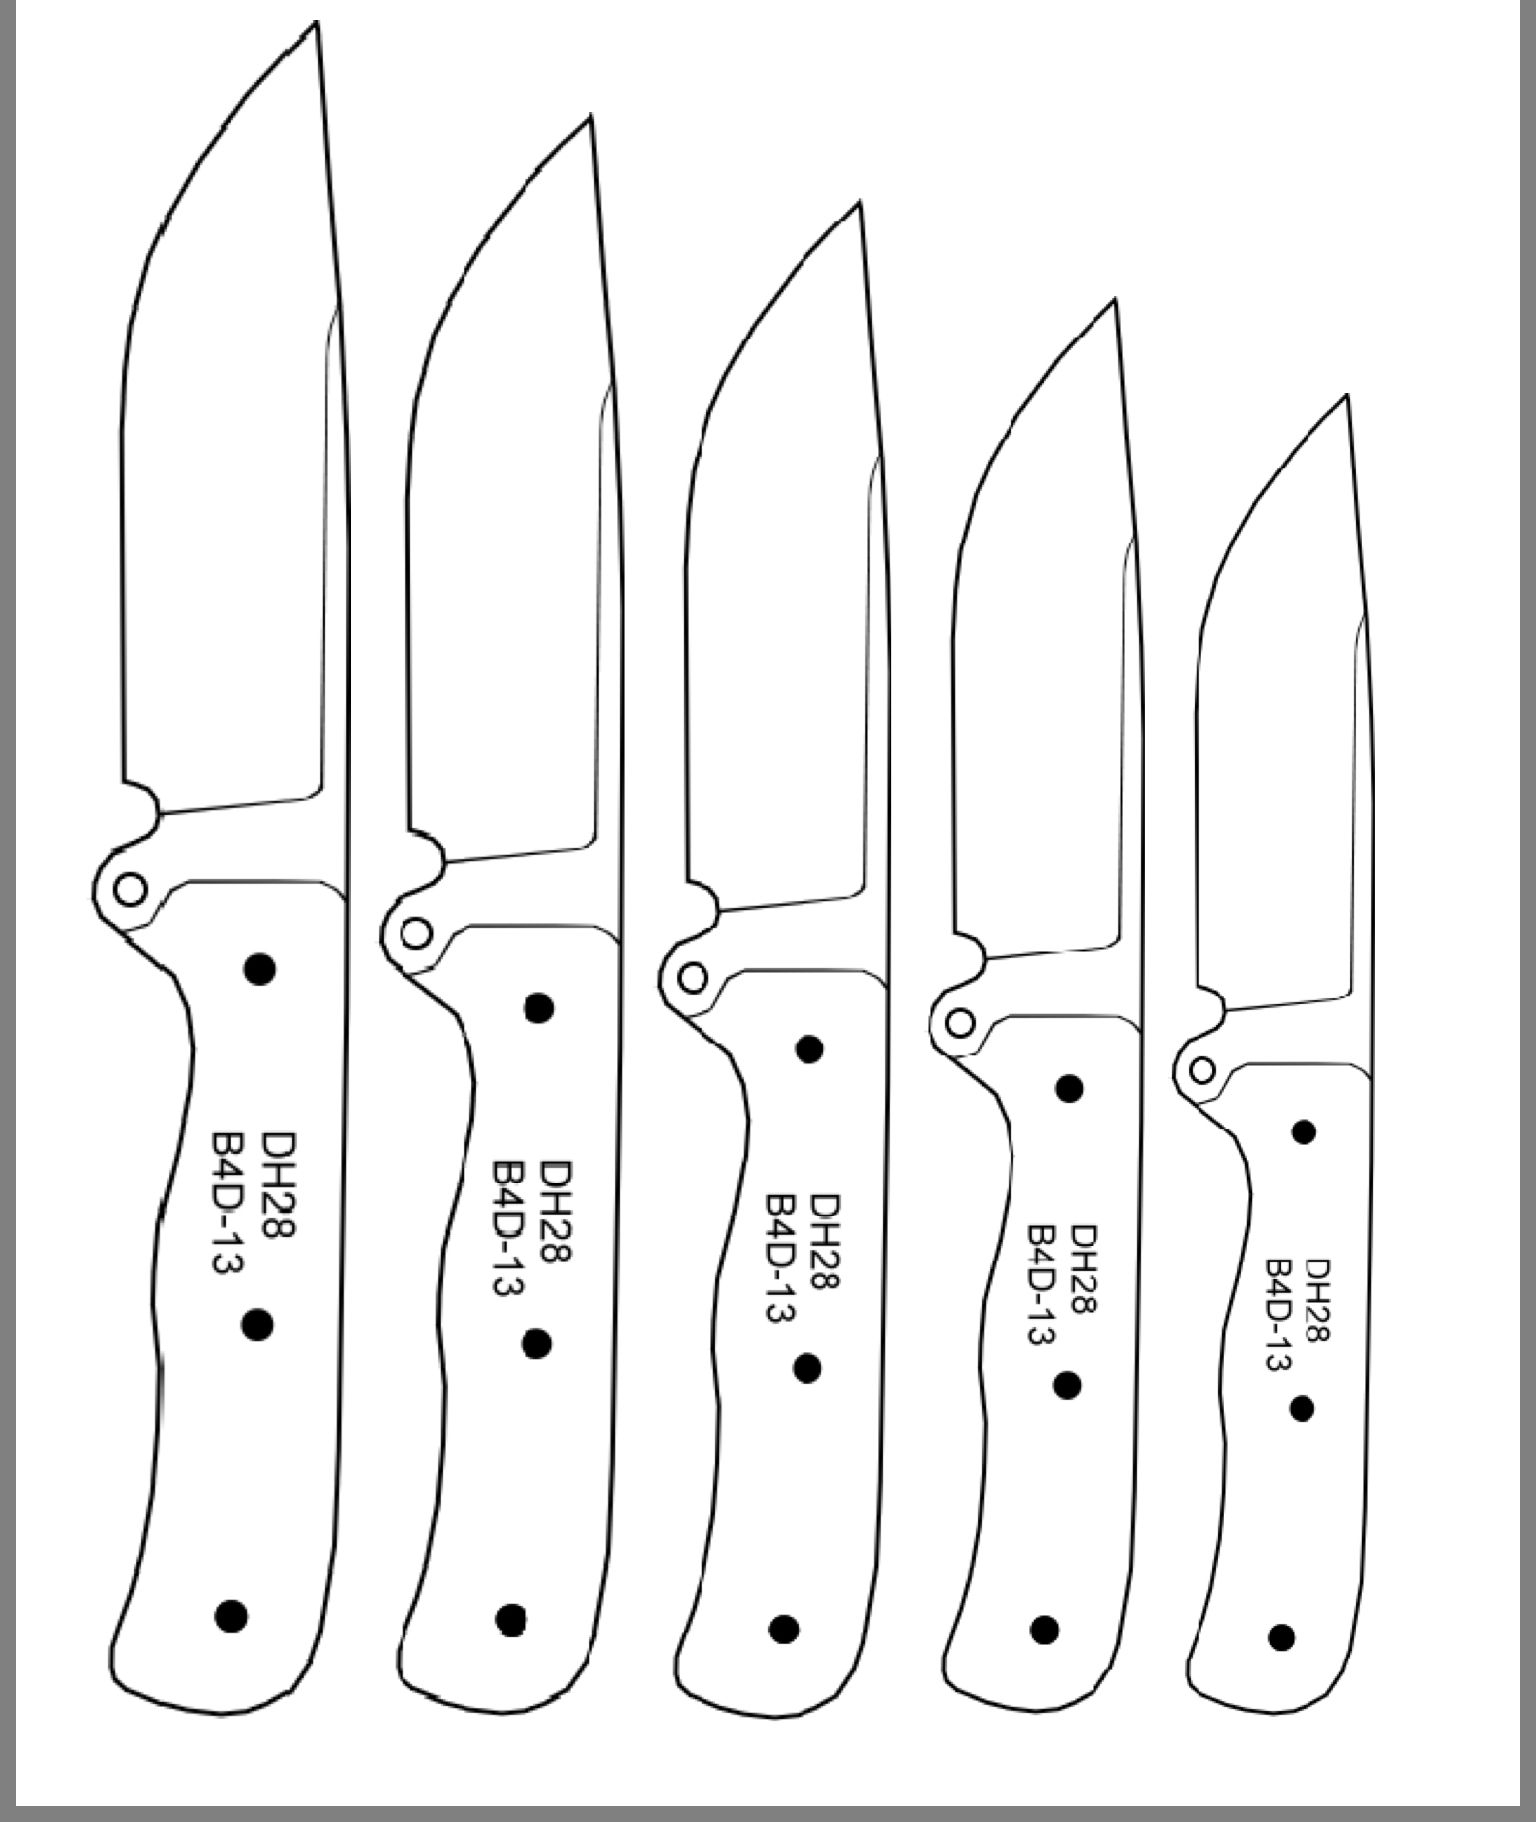 Pin By Philip Thomas On Knives Knife Patterns Knife Template Knife Making